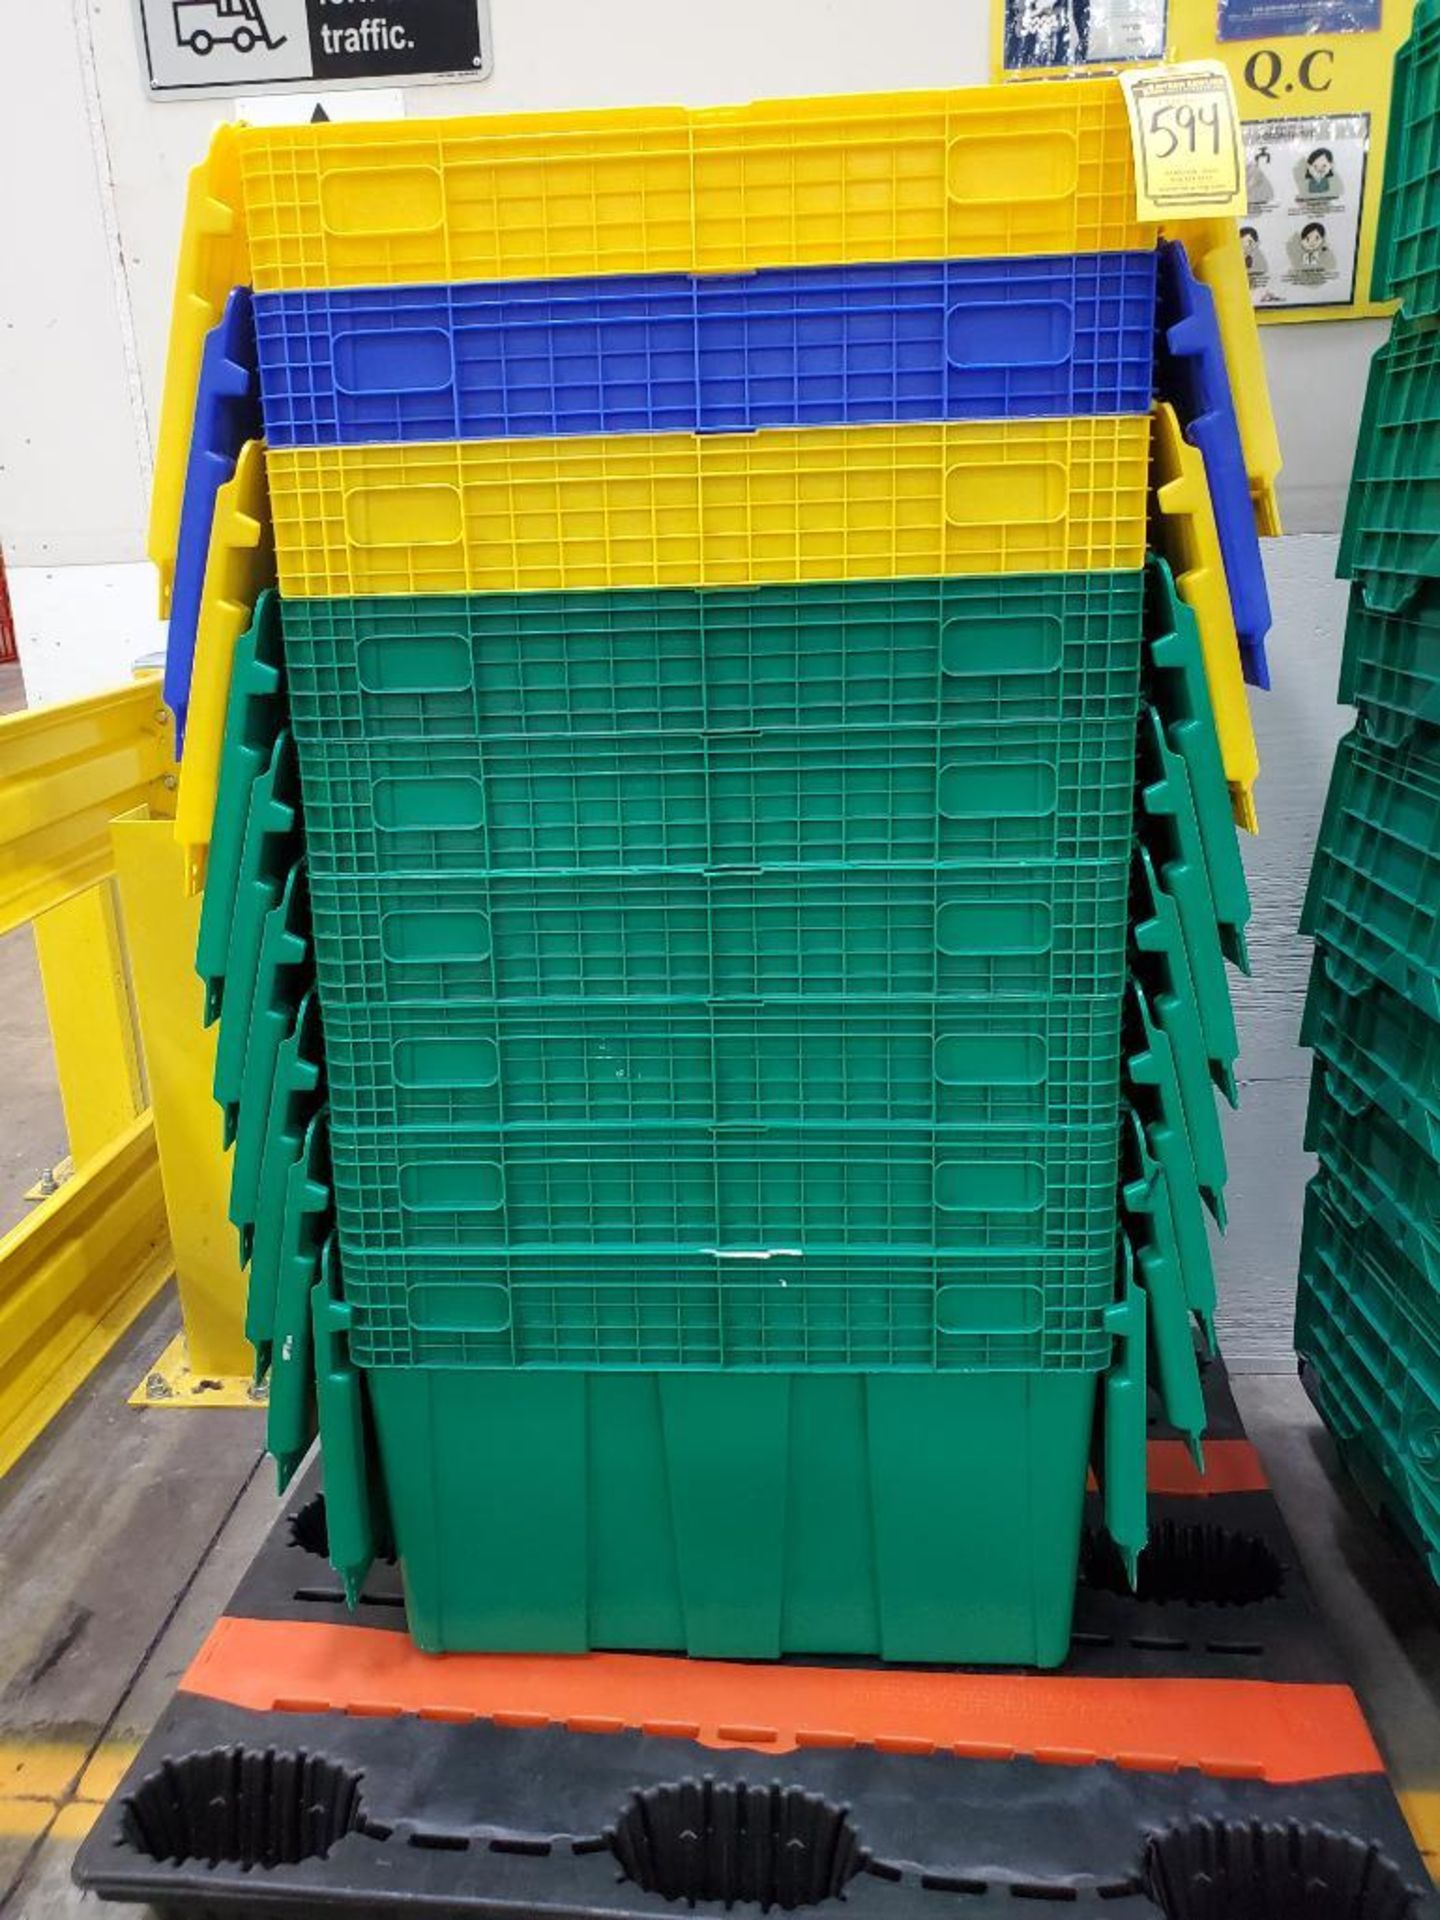 STORAGE CRATES; (2) SMALL, (9) MEDIUM, AND (9) LARGE - Image 2 of 2